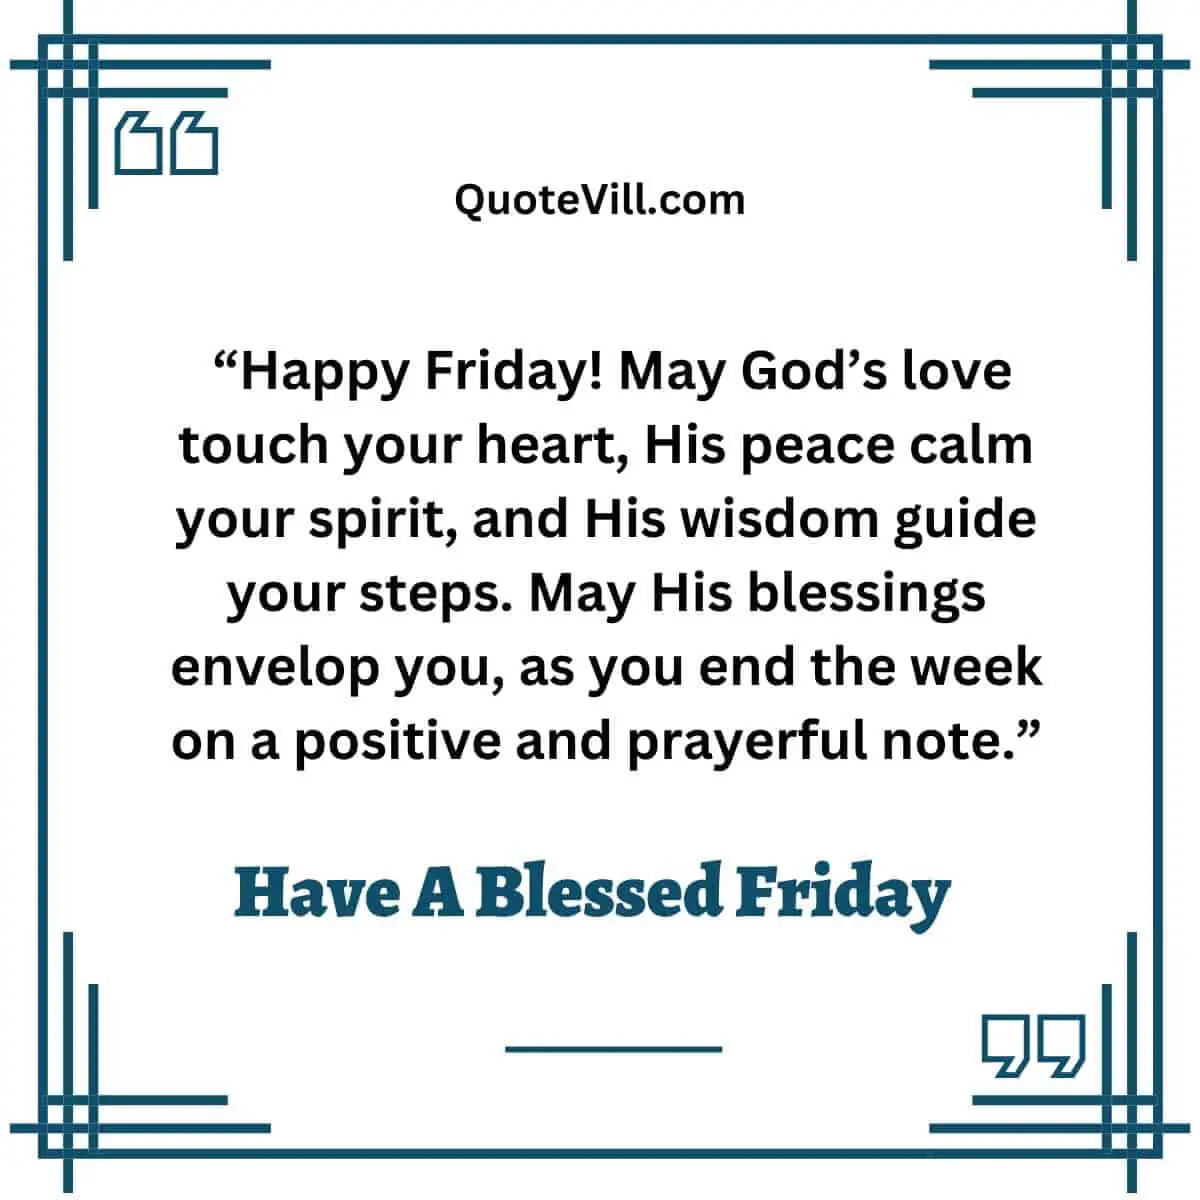 Inspirational Friday Blessings and Prayers